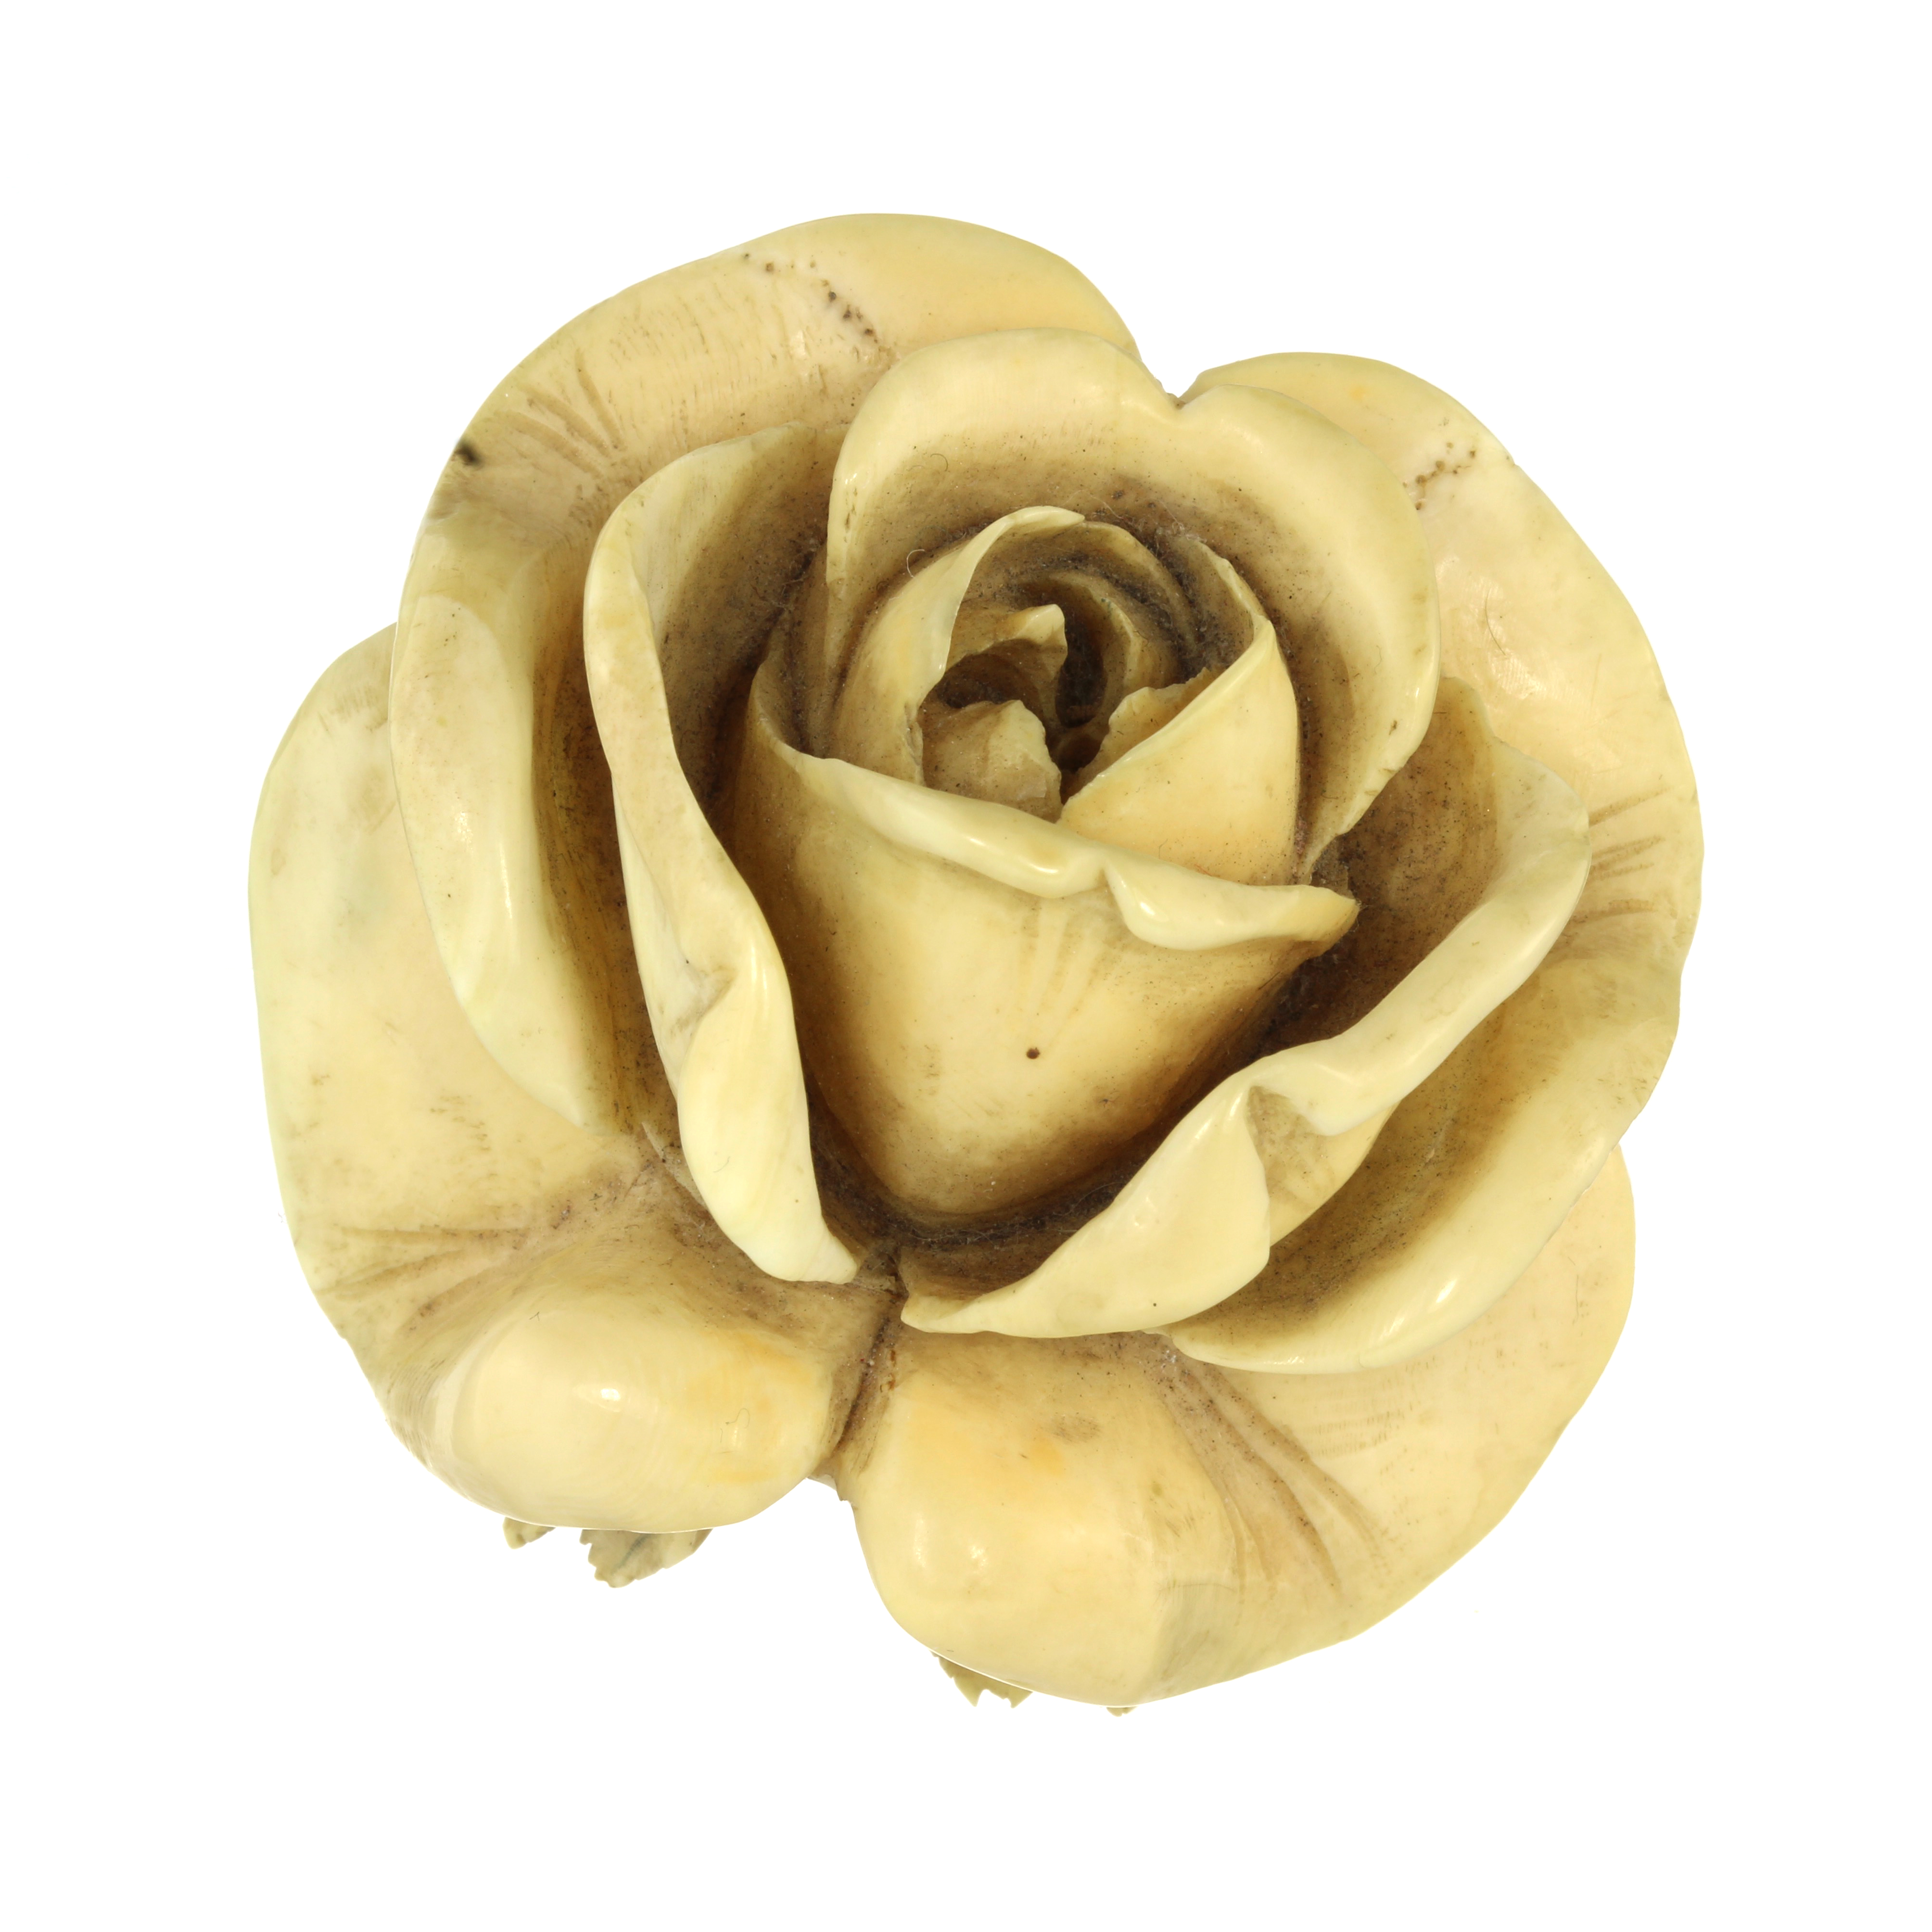 AN ANTIQUE CARVED BONE FLOWER BROOCH, LATE 19TH CENTURY carved in detail to depict a rose flower.